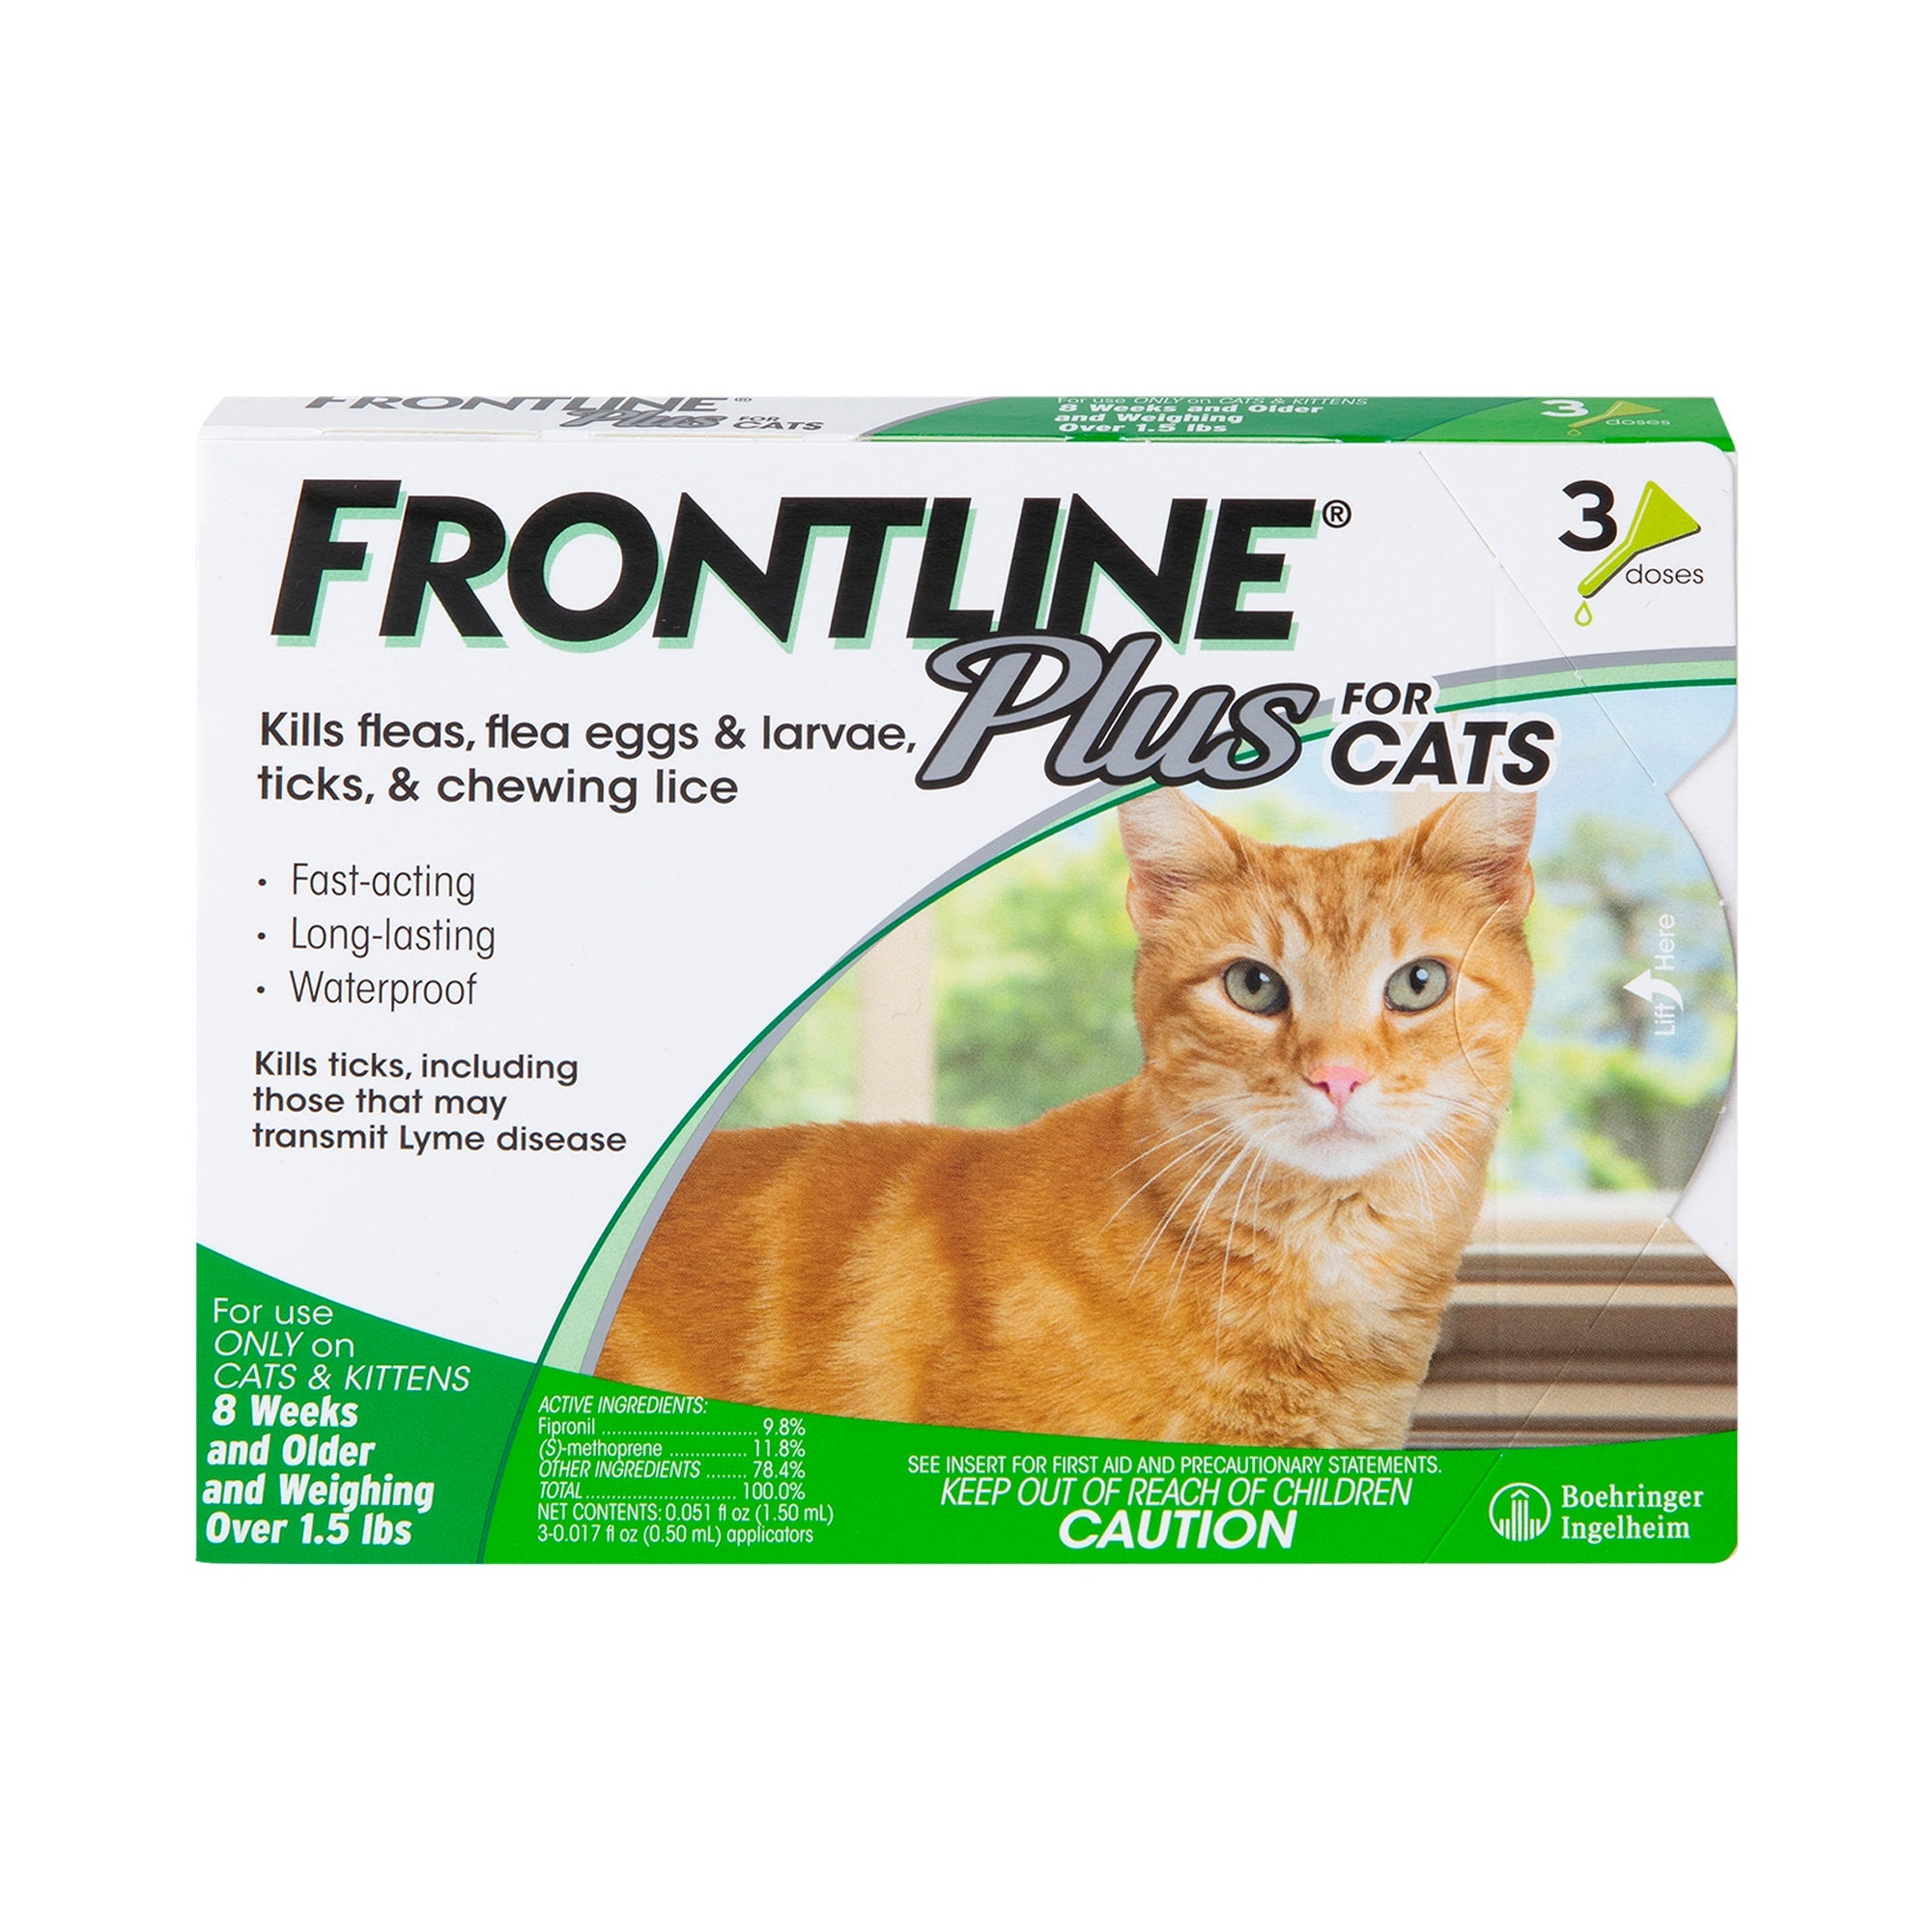 FRONTLINE Plus for Cats and Kittens 1.5 Lbs and over, Flea and Tick Treatment, 3 Doses